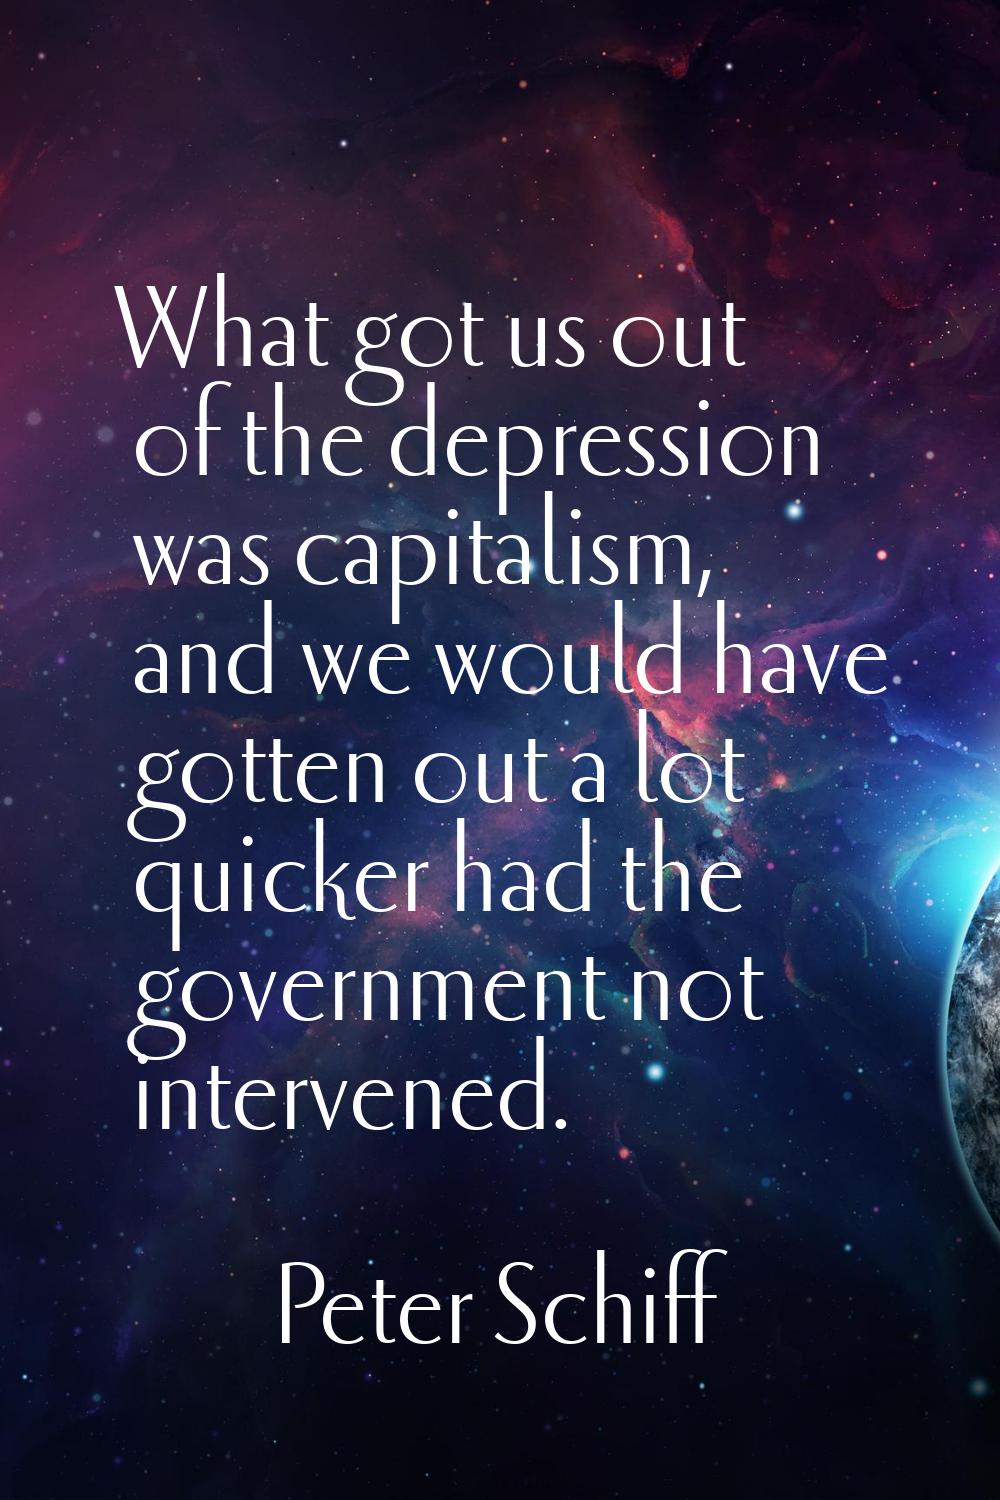 What got us out of the depression was capitalism, and we would have gotten out a lot quicker had th